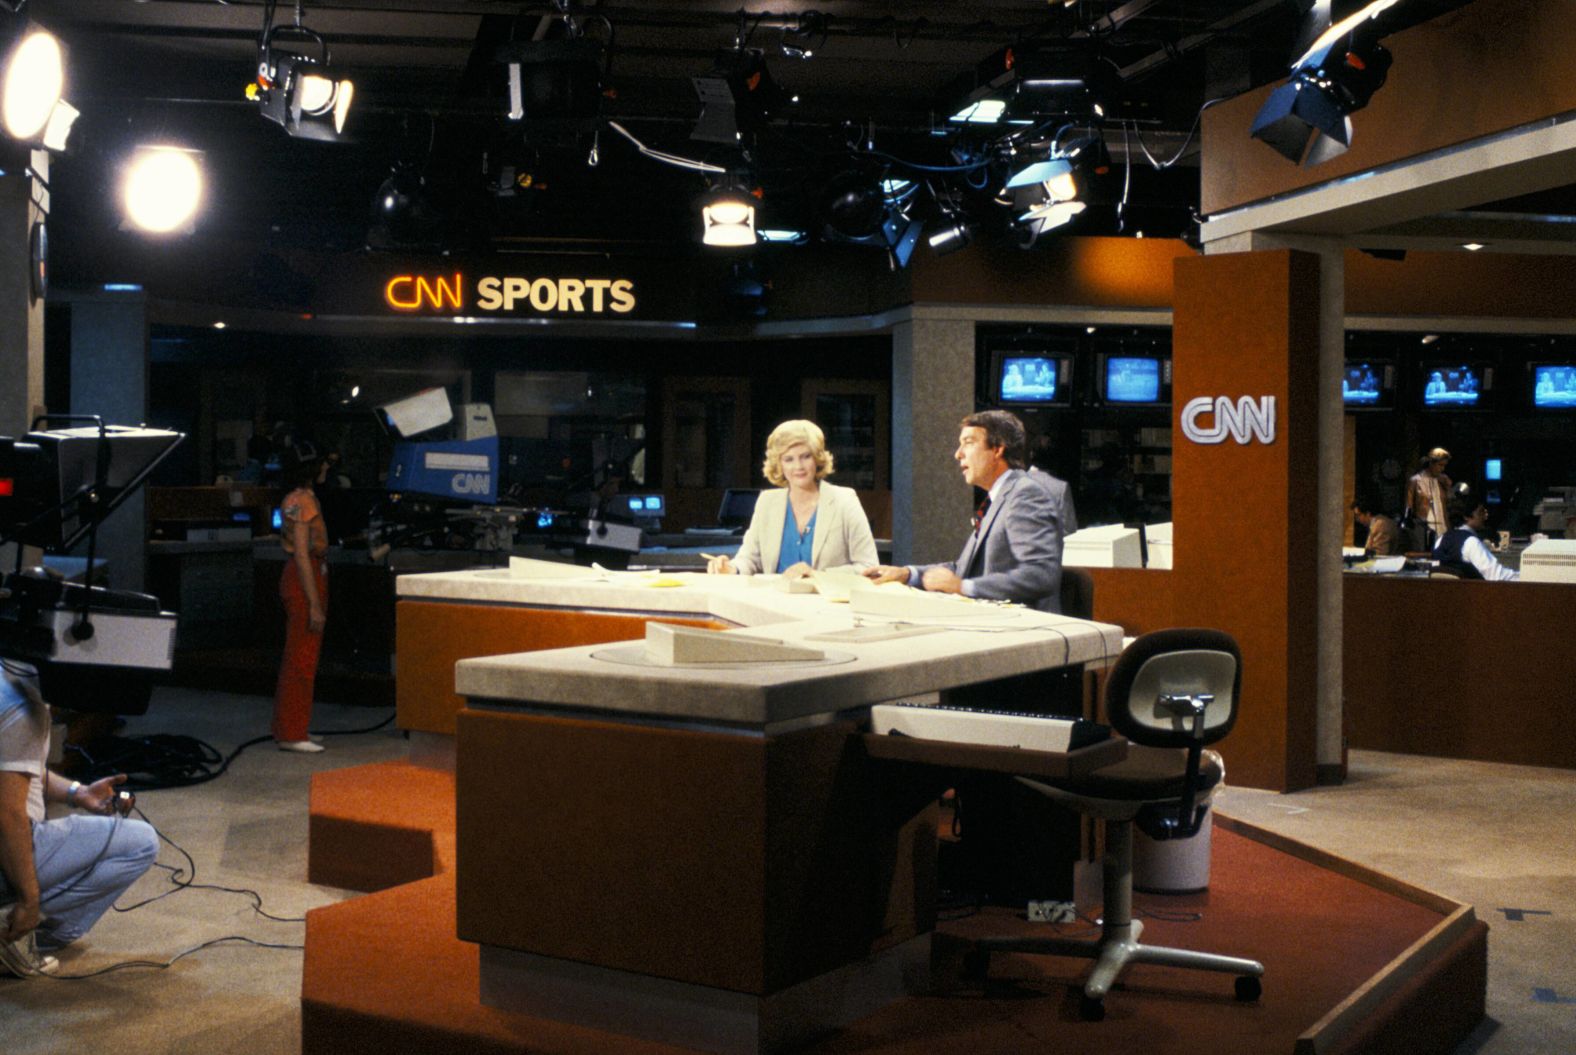 The husband and wife team of Dave Walker and Lois Hart co-anchor CNN's first broadcast on June 1, 1980. The network has been on the air ever since.